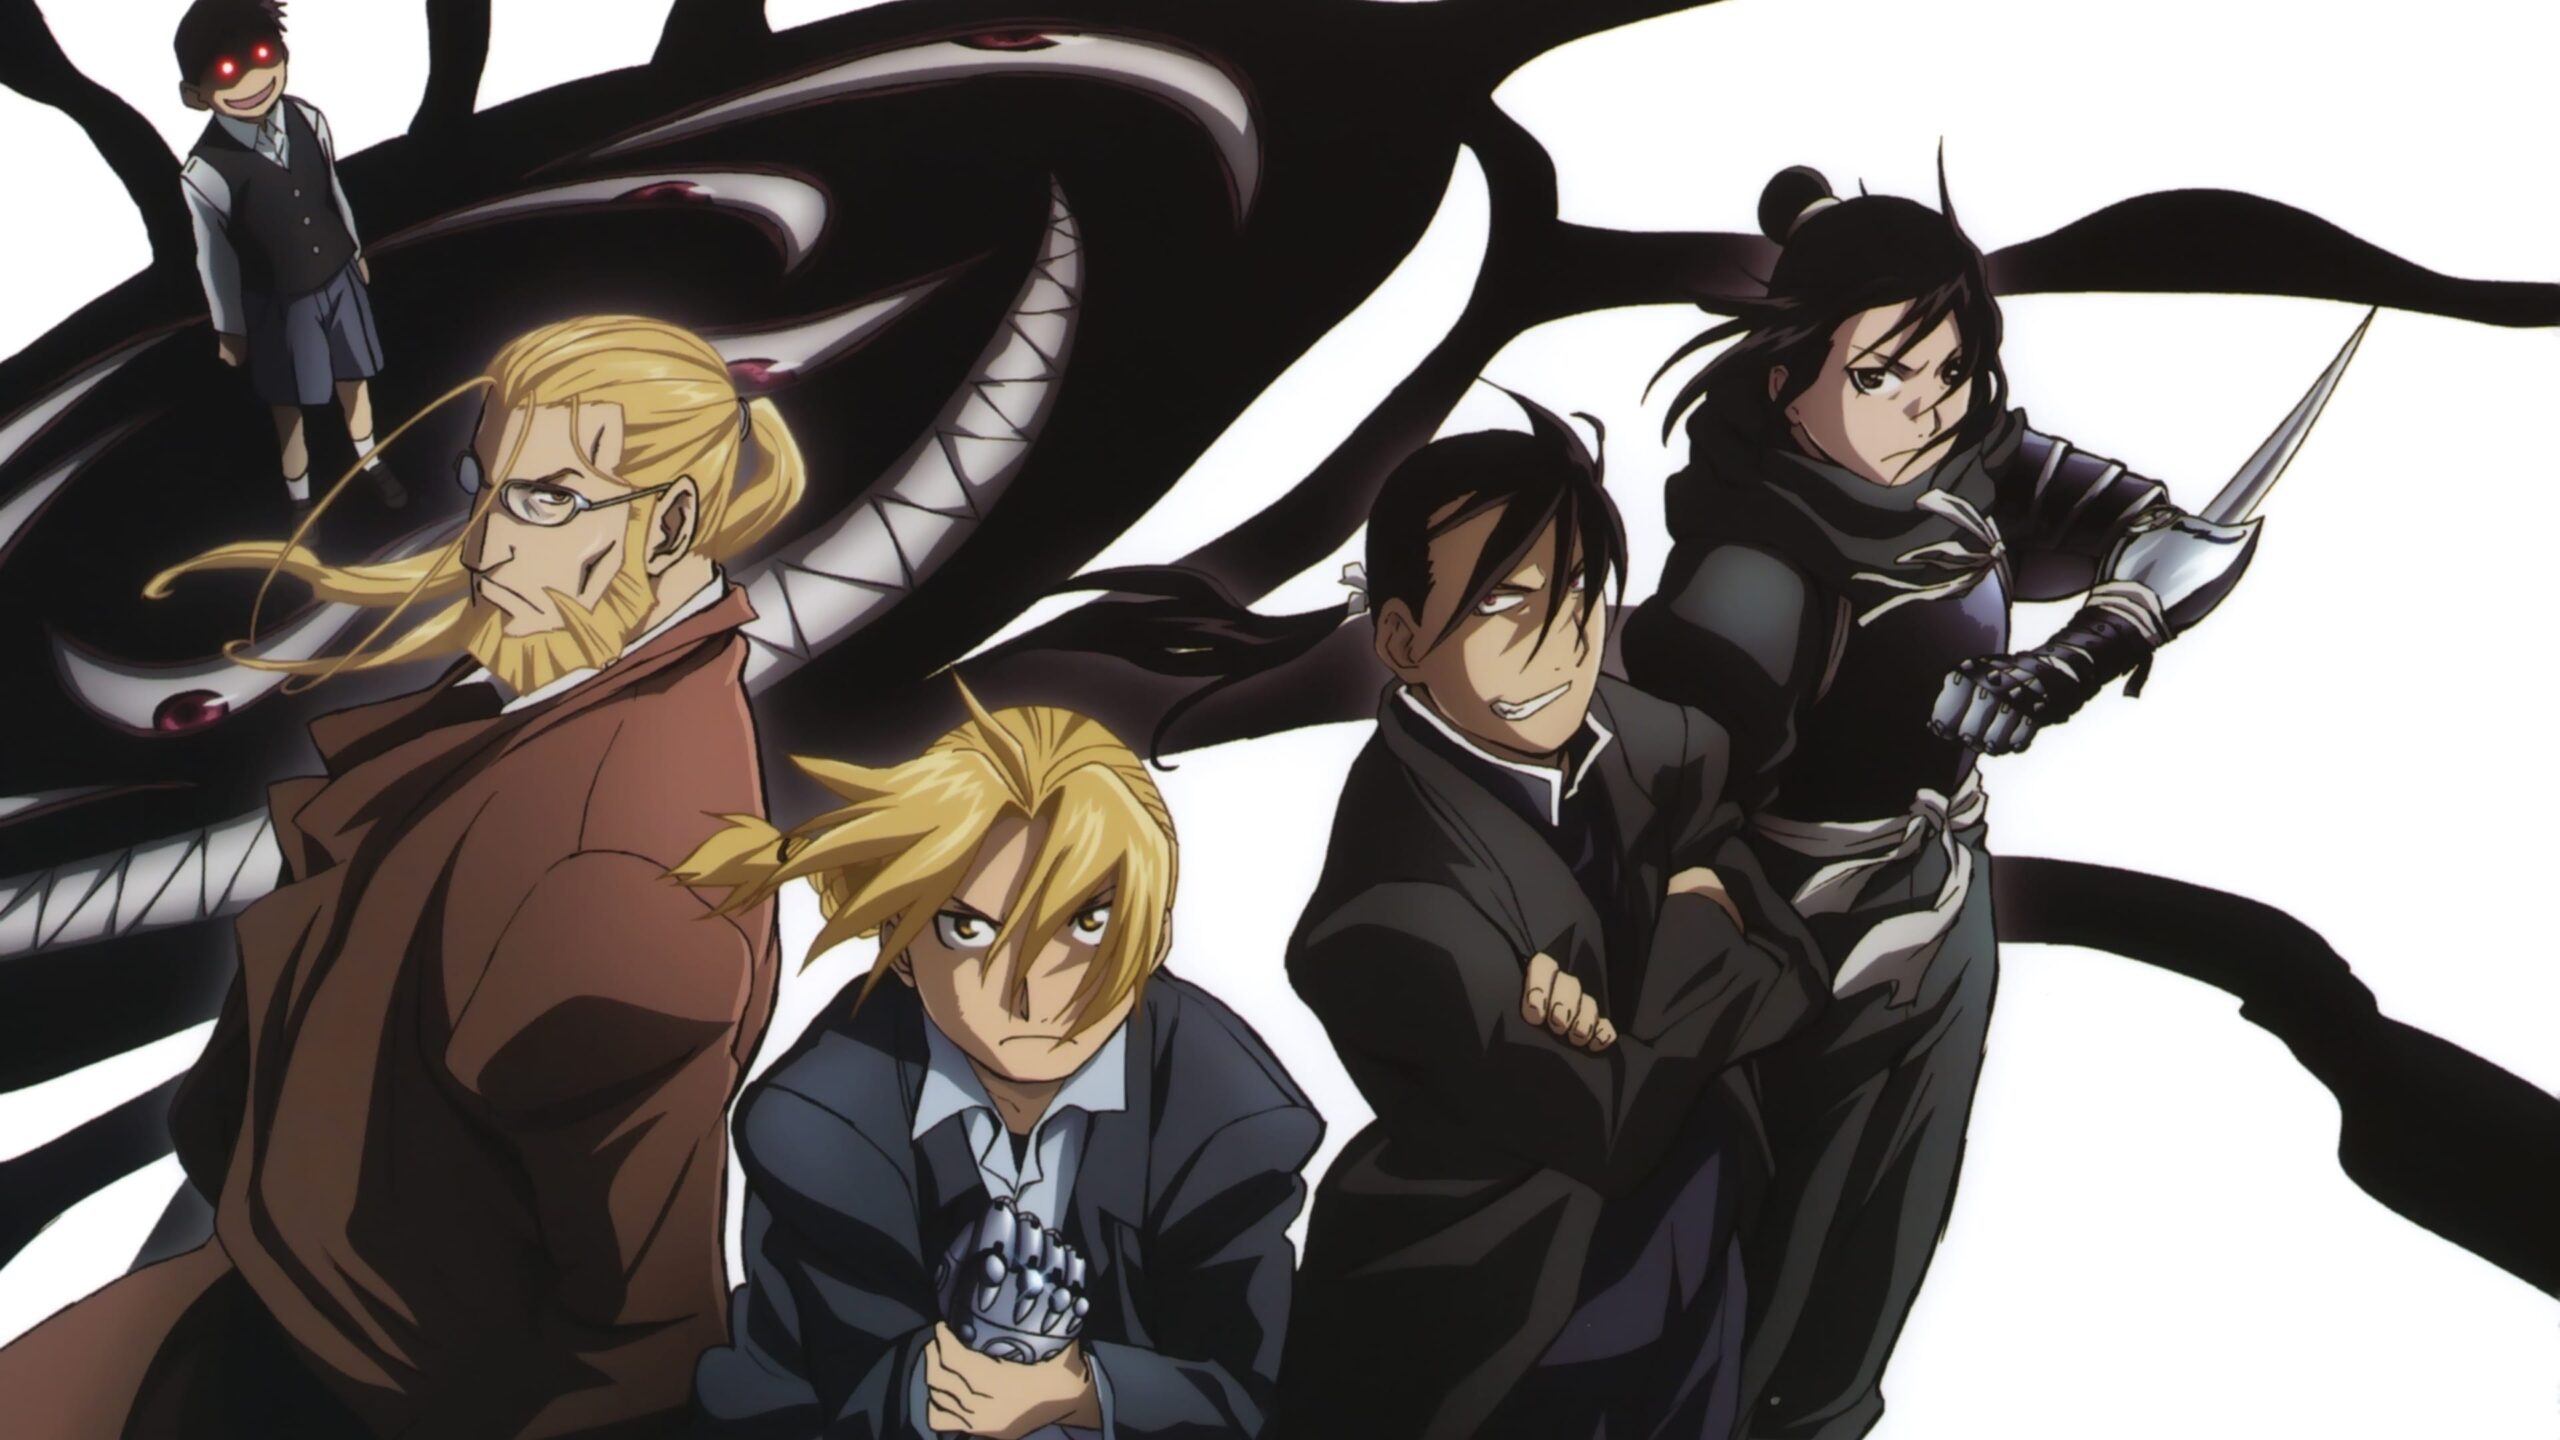 I'm currently on Episode 13 of Fullmetal Alchemist: Brotherhood. It's okay,  nothing special. At what episode does it get good? I've heard it gets  better at some point, but I don't know